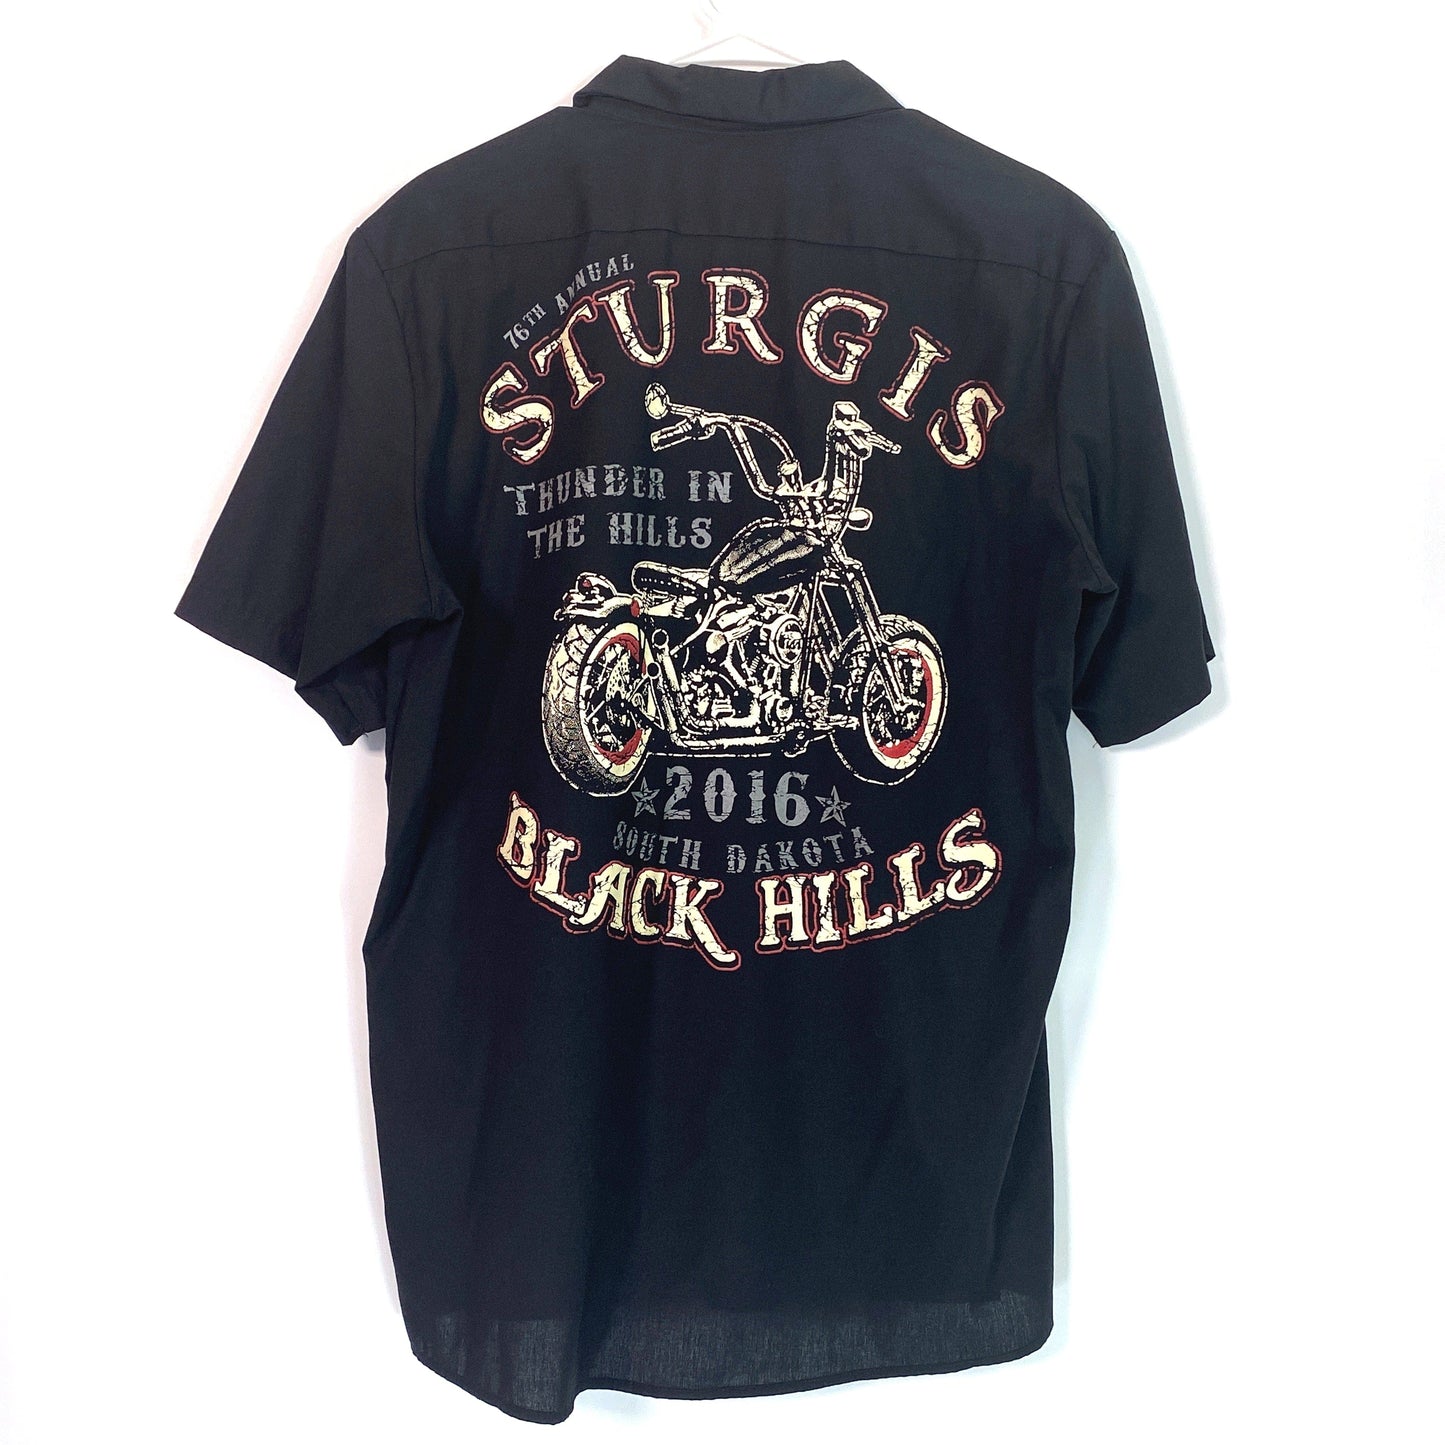 Dickies Mens Size L Black STURGIS RALLY WEEK Work Shirt S/s Button-Up